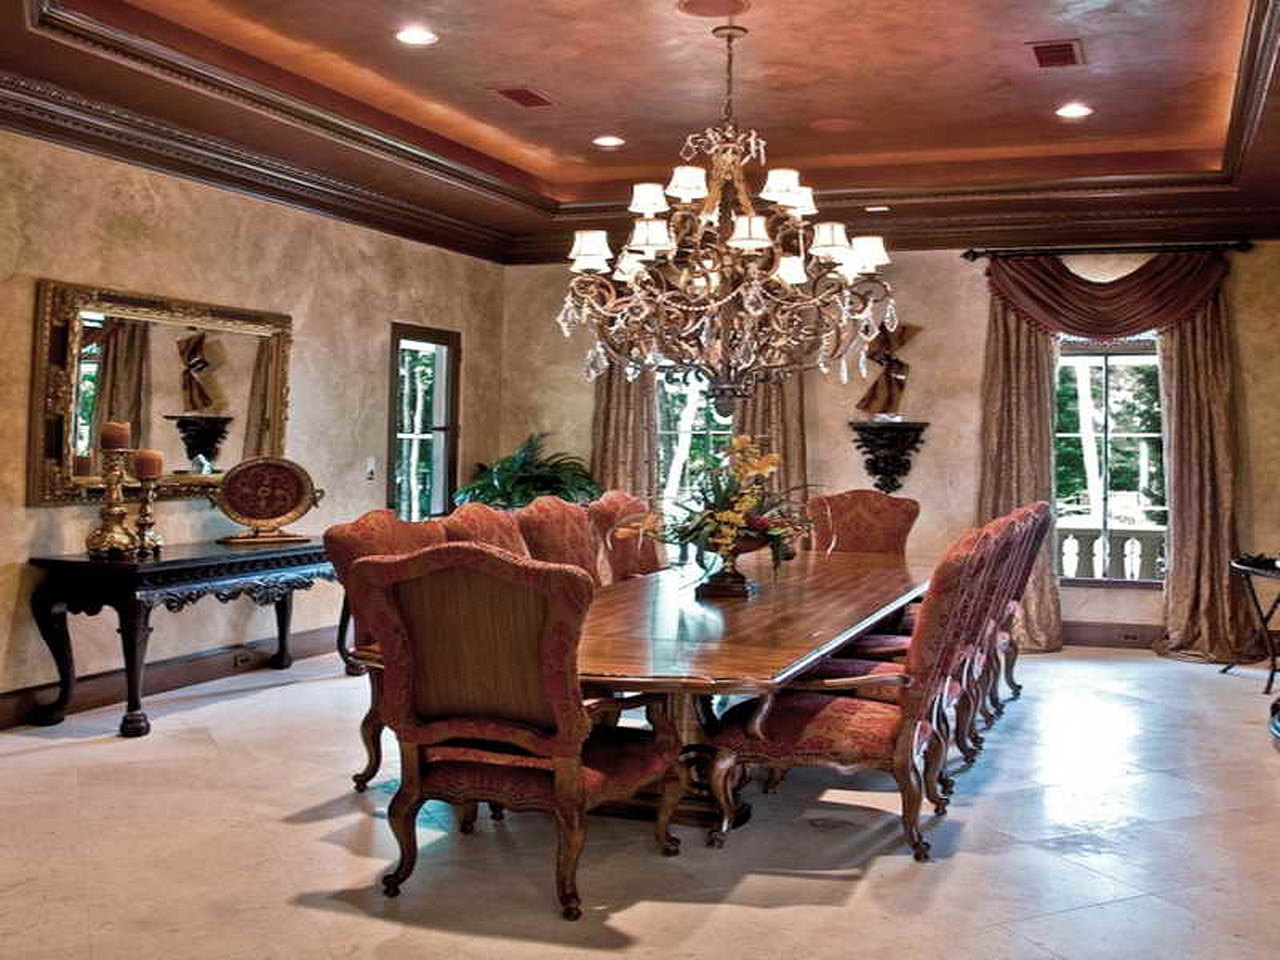 79 handpicked dining room ideas for sweet home. - Interior ...
